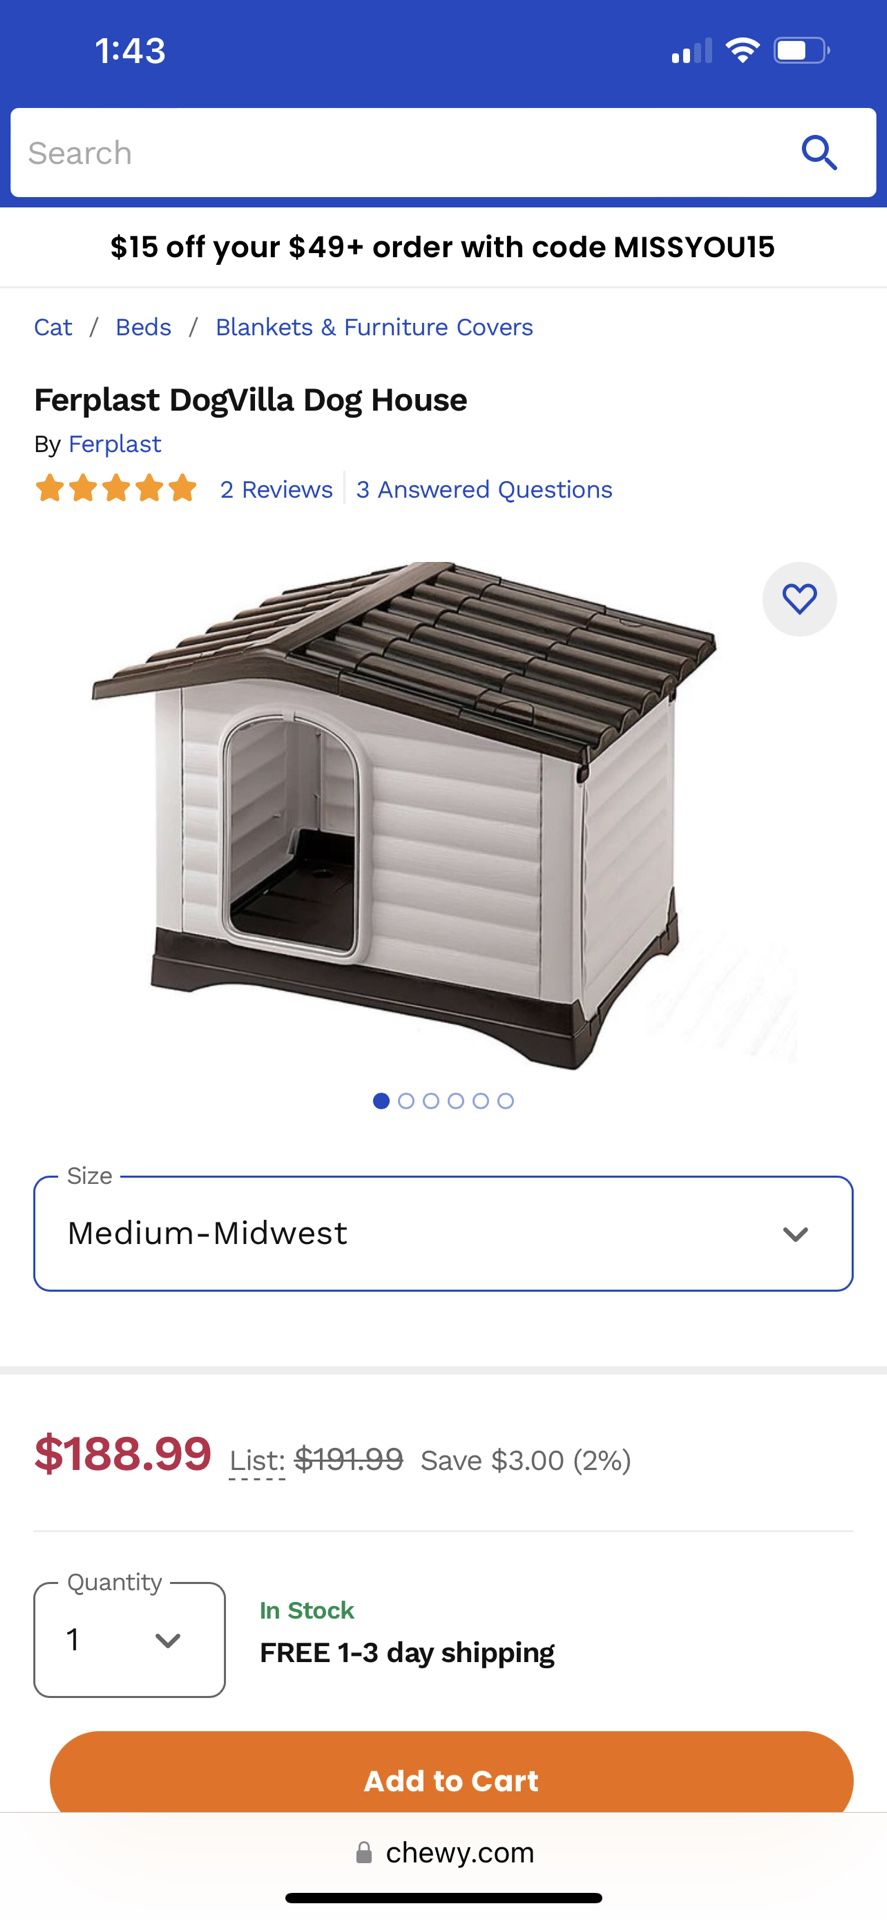 Dog House From https://offerup.com/redirect/?o=Y2hld3kuY29t